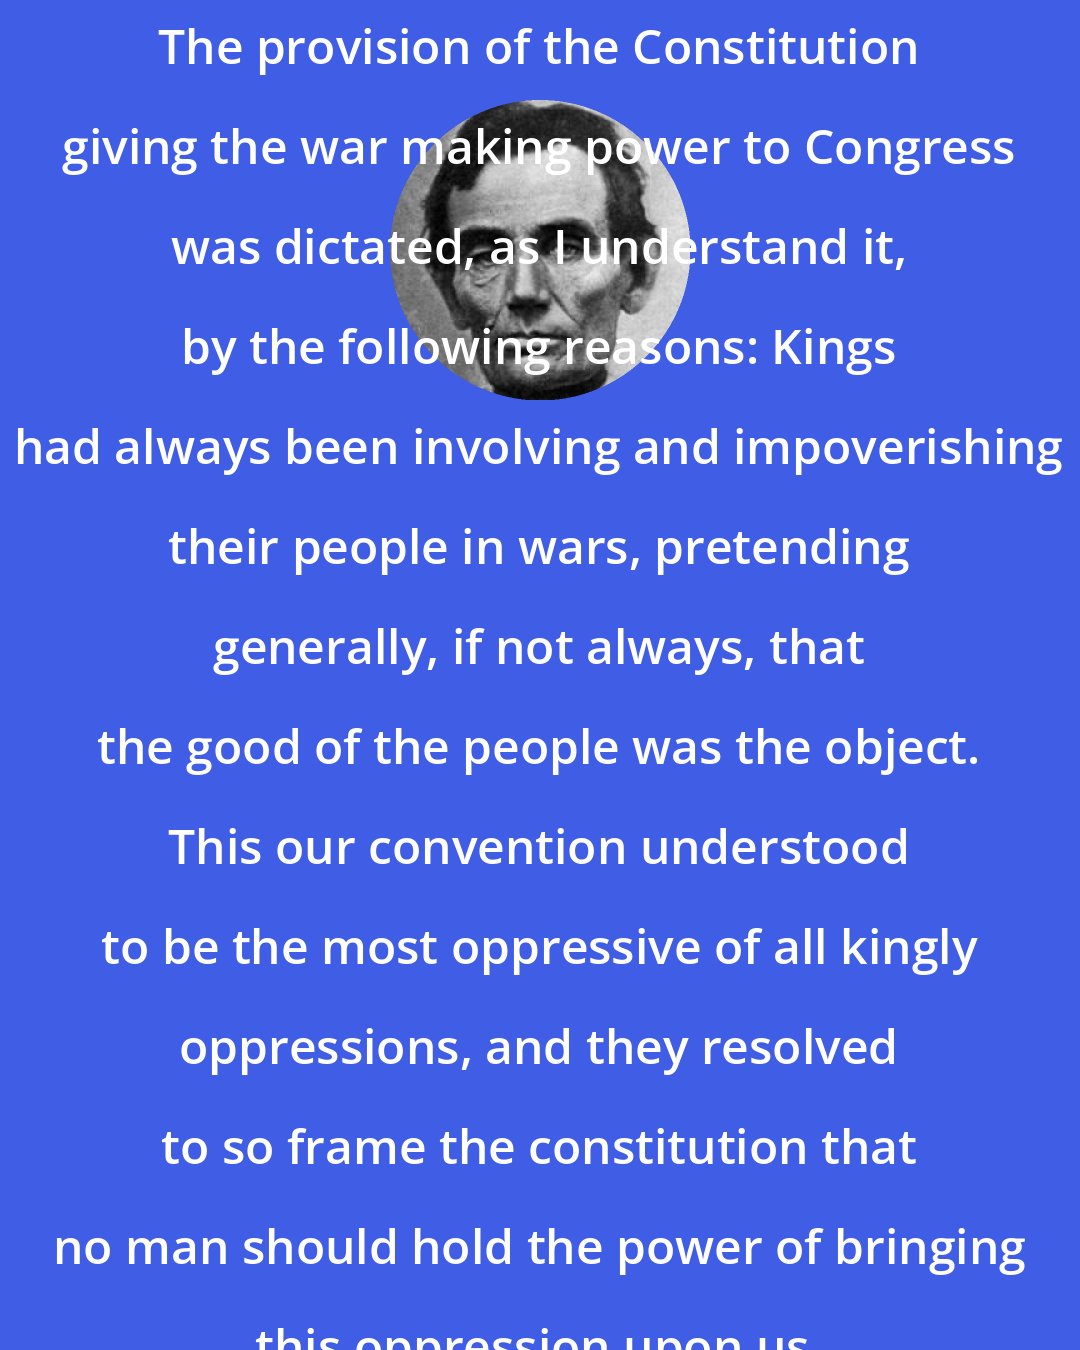 Abraham Lincoln: The provision of the Constitution giving the war making power to Congress was dictated, as I understand it, by the following reasons: Kings had always been involving and impoverishing their people in wars, pretending generally, if not always, that the good of the people was the object. This our convention understood to be the most oppressive of all kingly oppressions, and they resolved to so frame the constitution that no man should hold the power of bringing this oppression upon us.